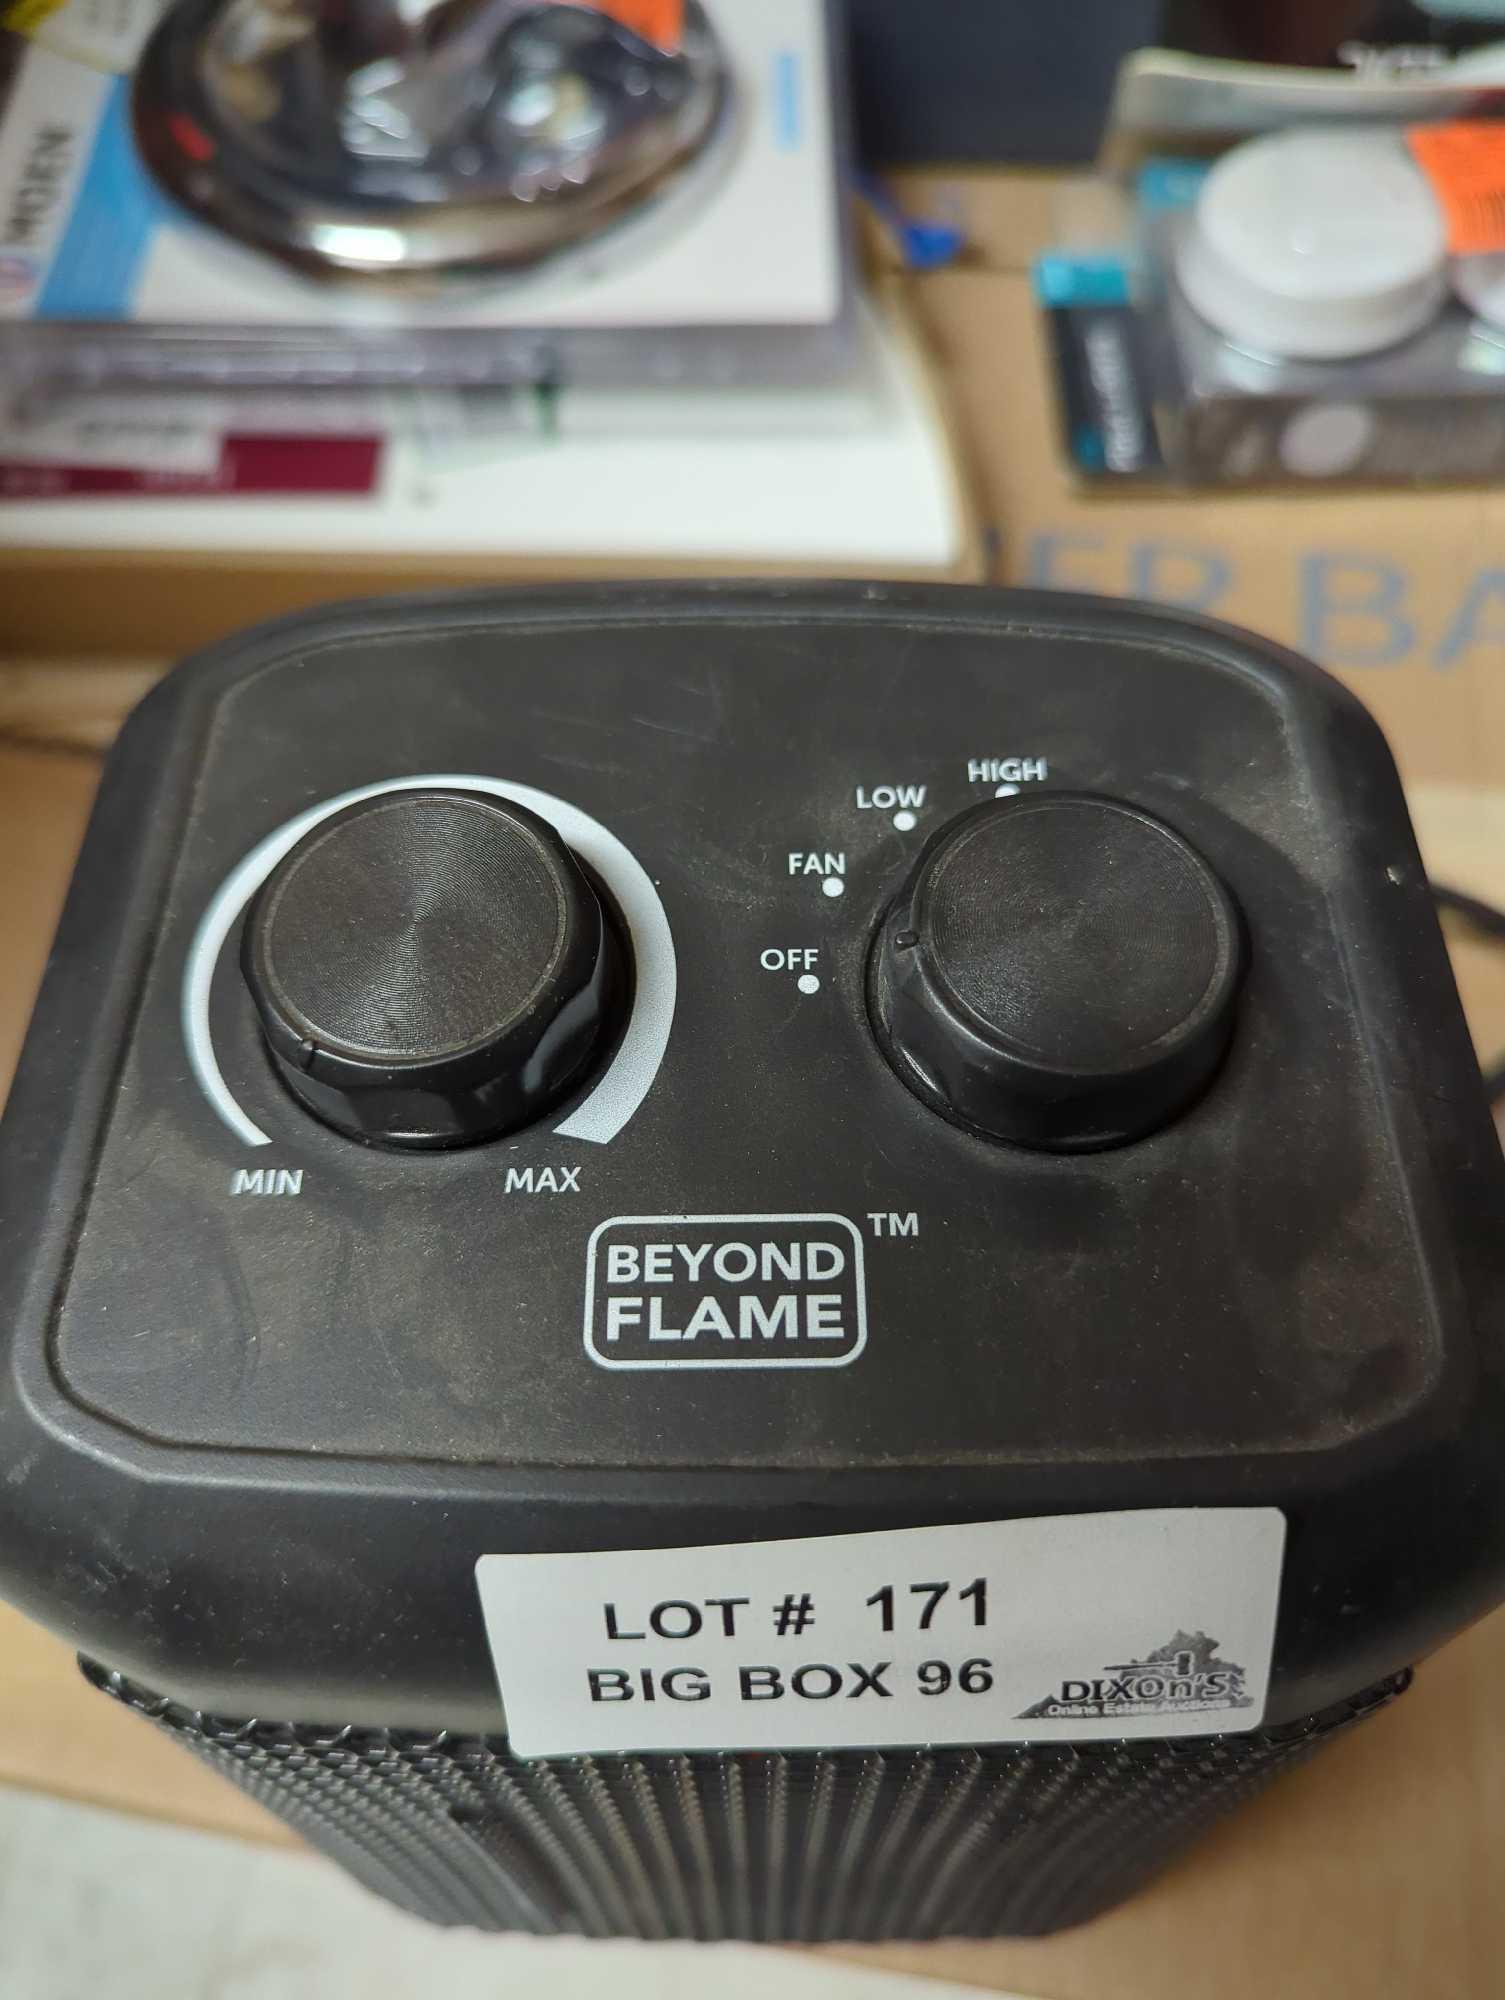 Beyond Flame 1500-Watt Electric Personal Ceramic Space Heater, Appears to be Used Out of the Box